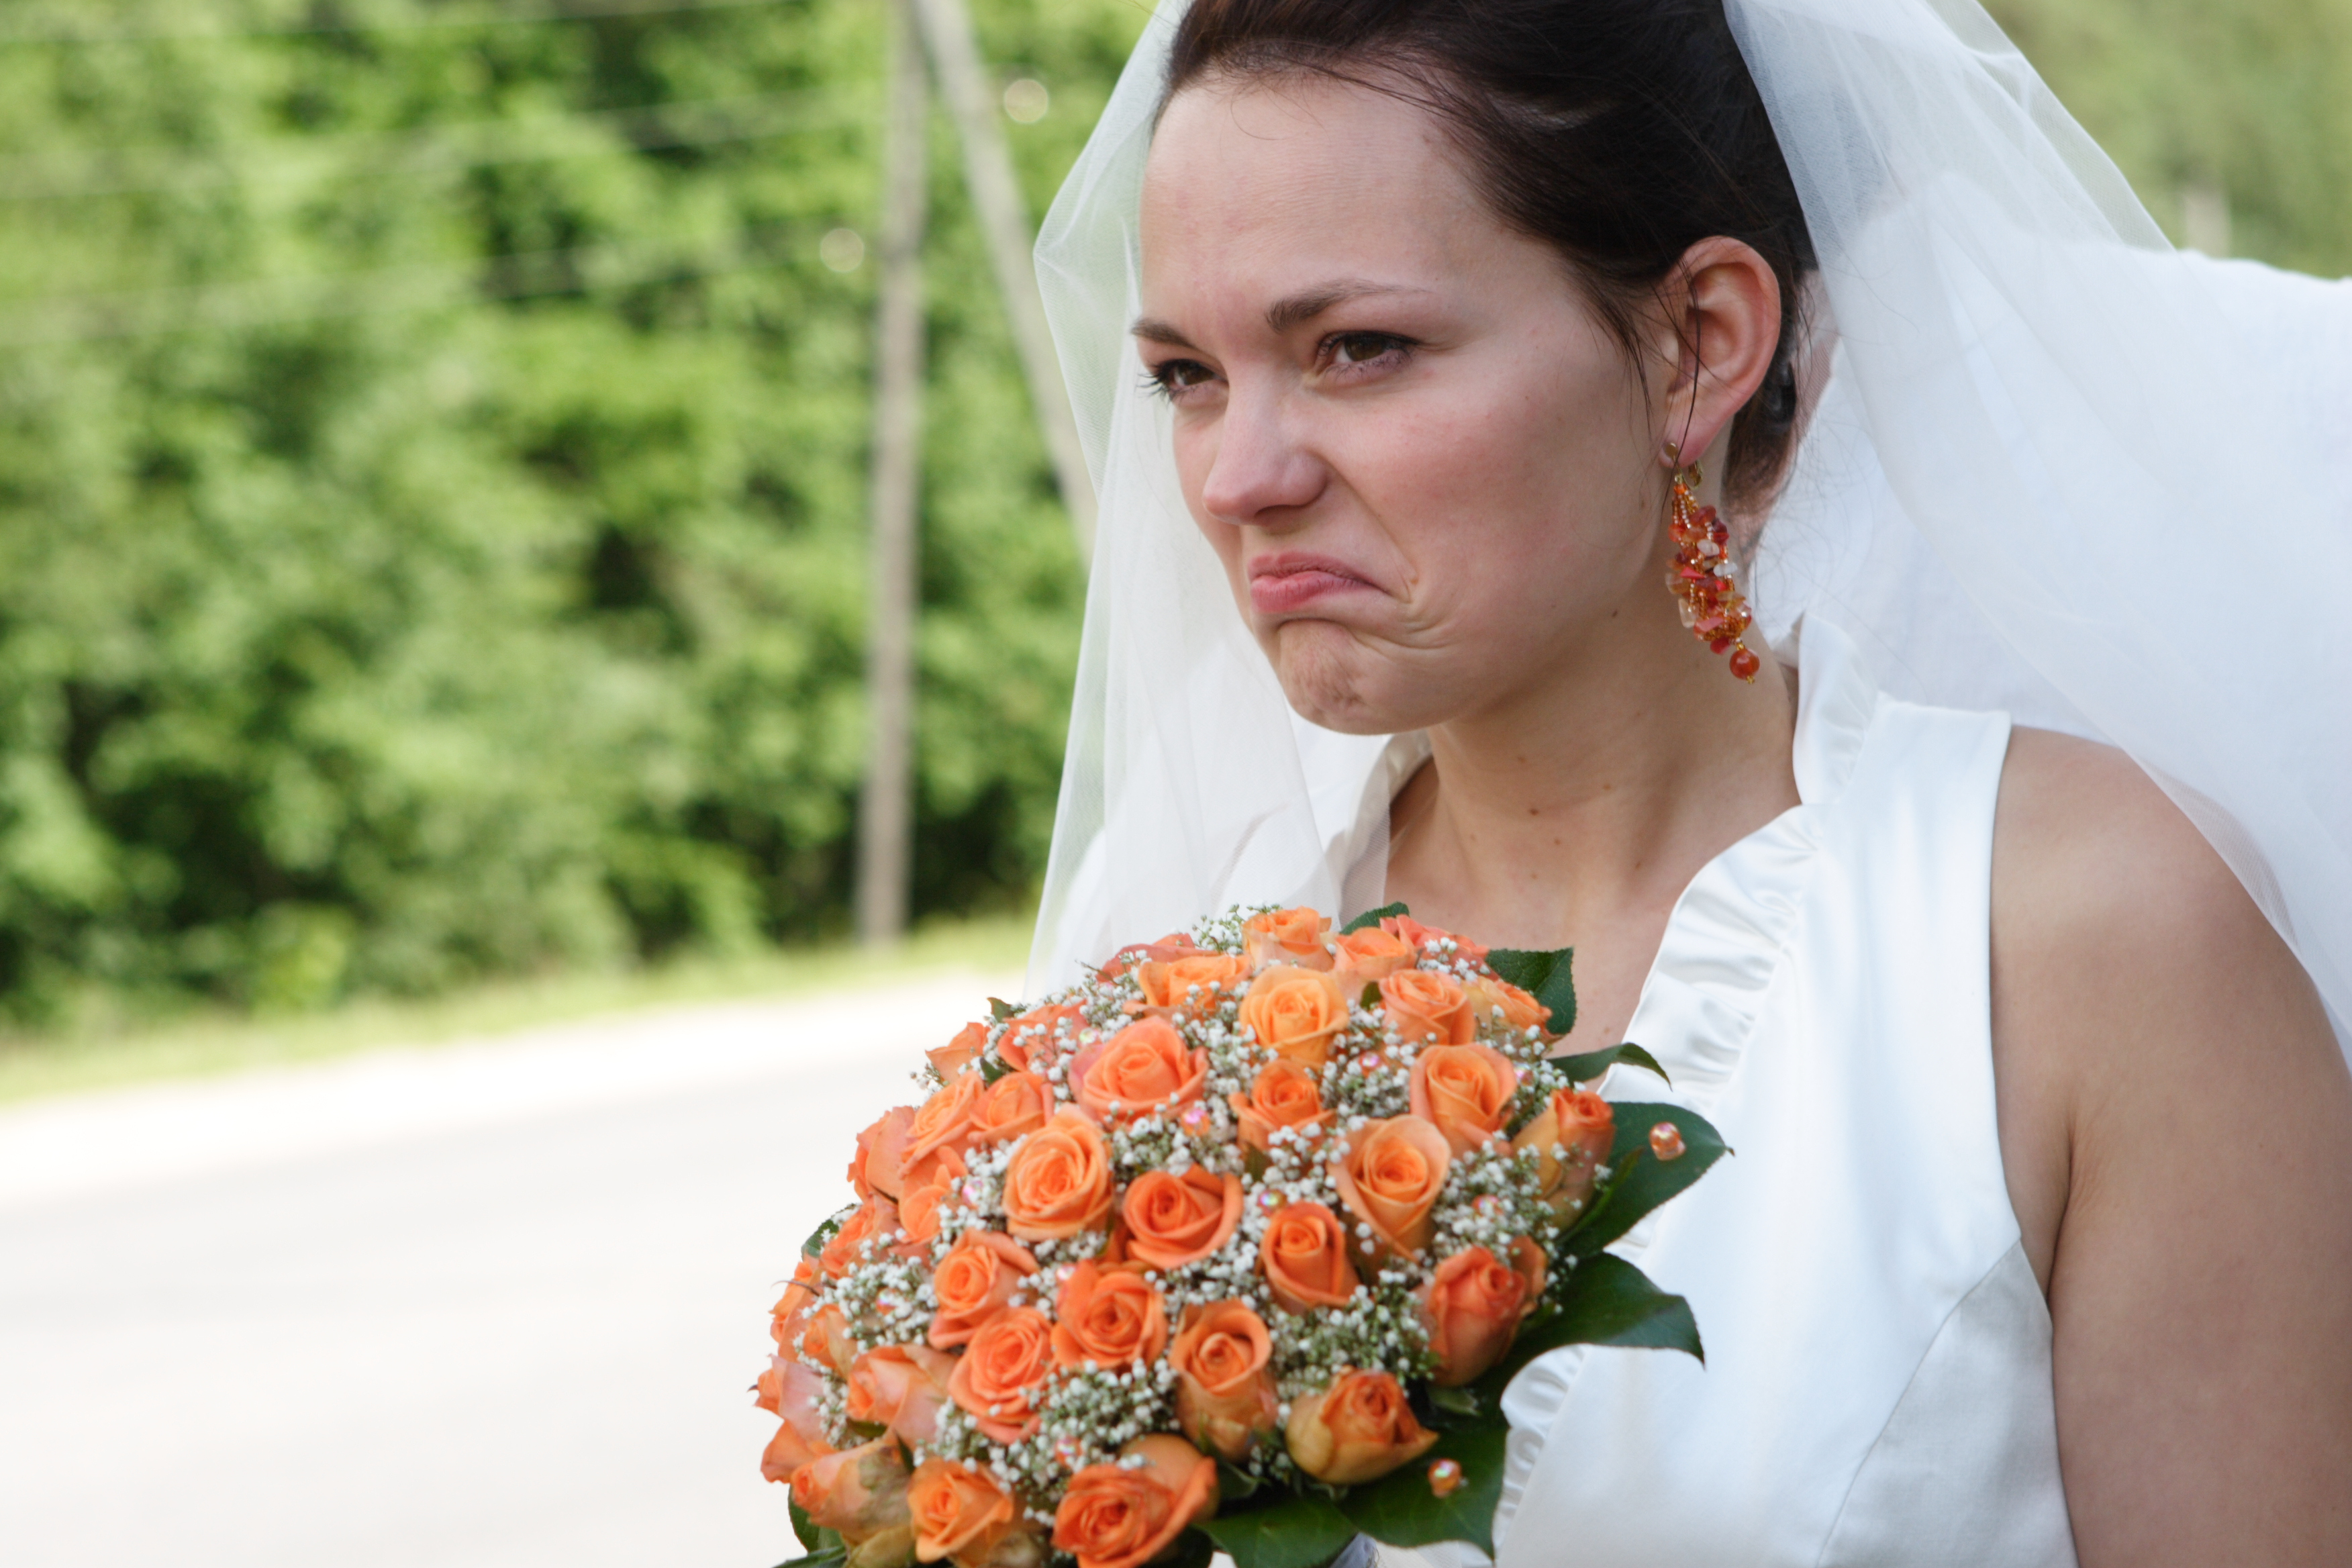 Unhappy bride | Source: Getty Images